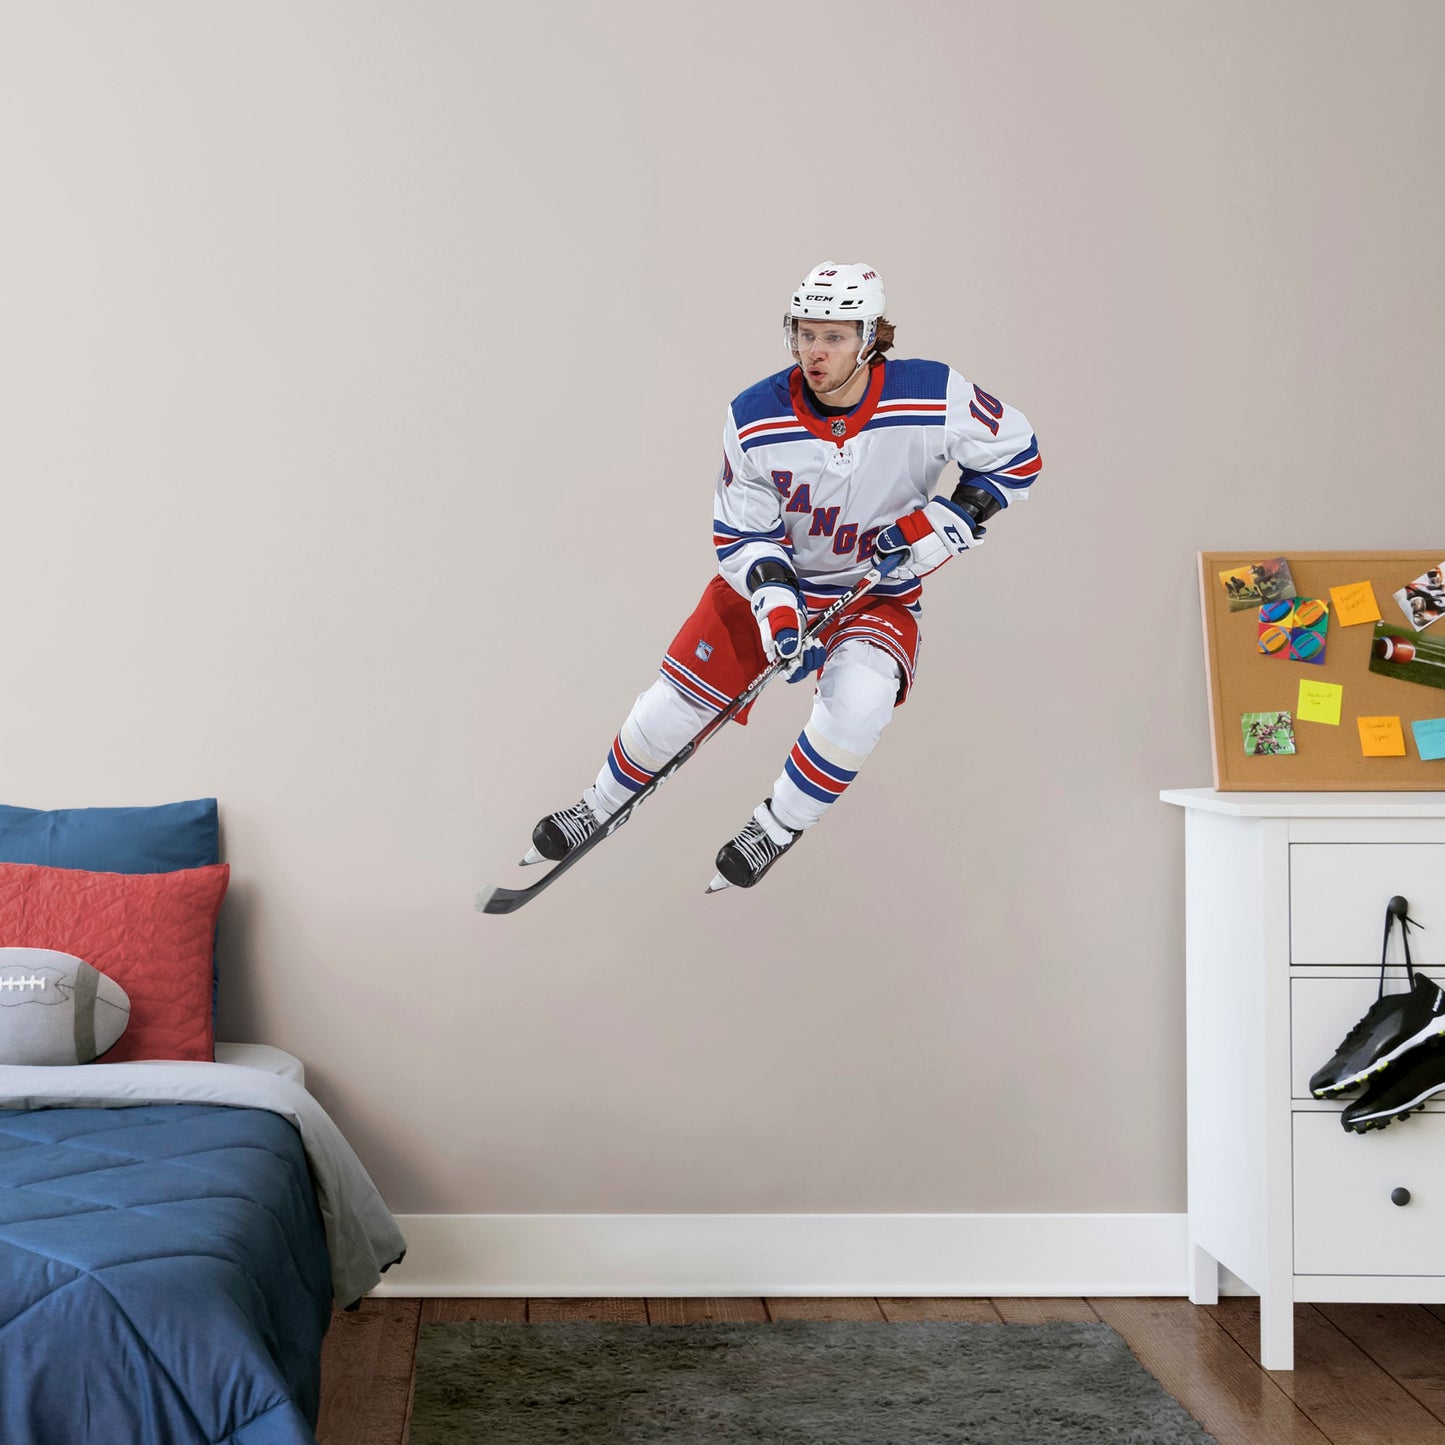 Giant Athlete + 2 Decals (40"W x 46"H) The opposing goaltender had better be in position when Artemi Panarin takes the ice in this officially licensed NHL wall decal. The left wing for the New York Rangers has been making noise throughout the league since going undrafted and then becoming one of the NHL's top rookies a few years ago. This high-quality decal of the Breadman is the perfect addition to any Rangers fan's game room or bar, and can be easily removed in case it needs to be regifted.